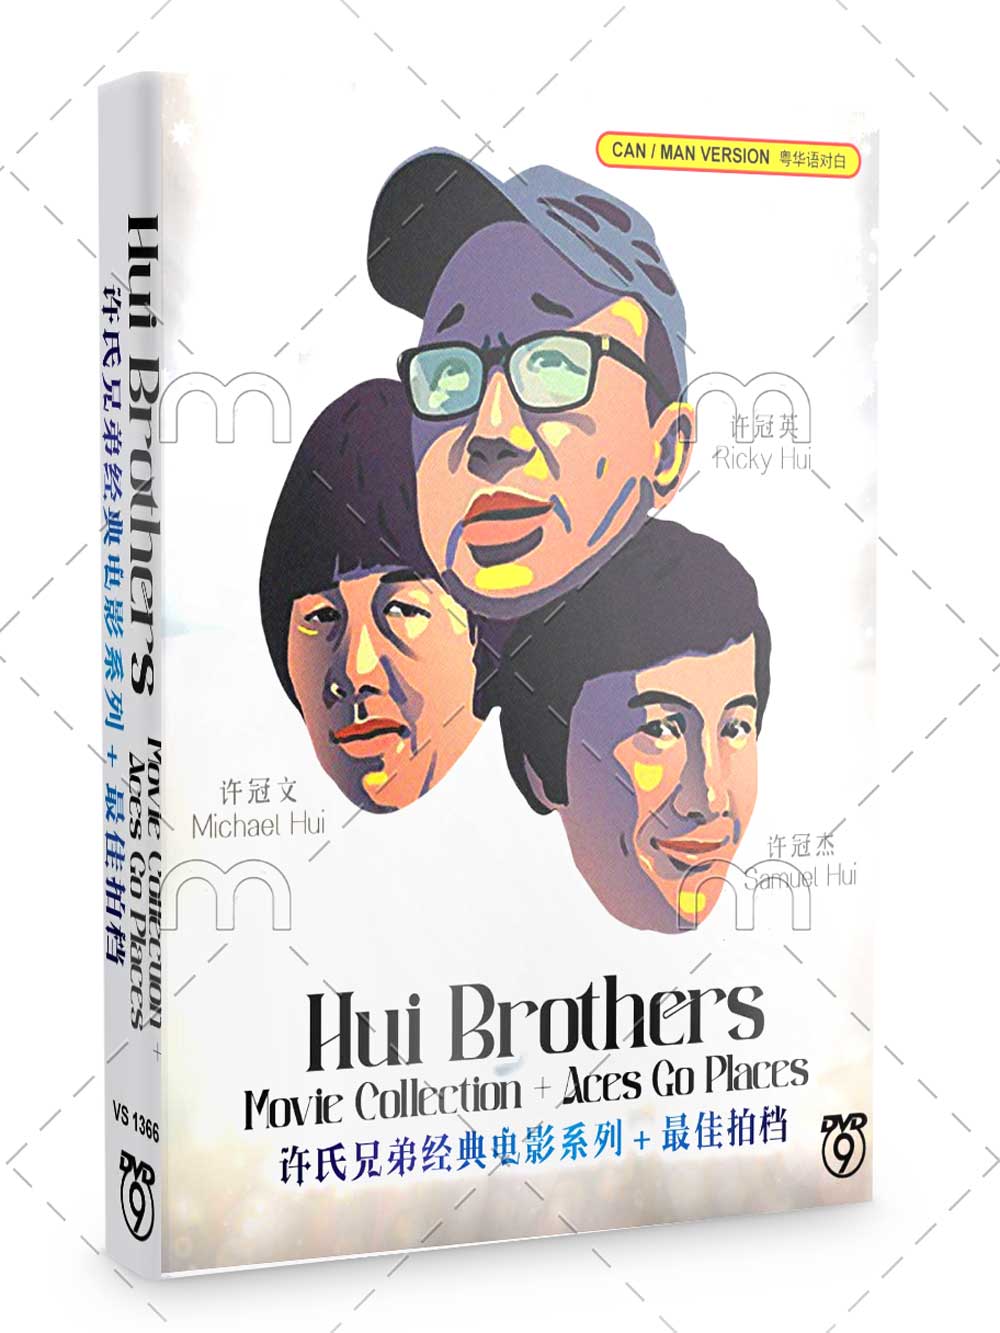 Hui Brother Movie Collection + Aces Go Places (DVD) (1974-1990) Hong Kong Movie